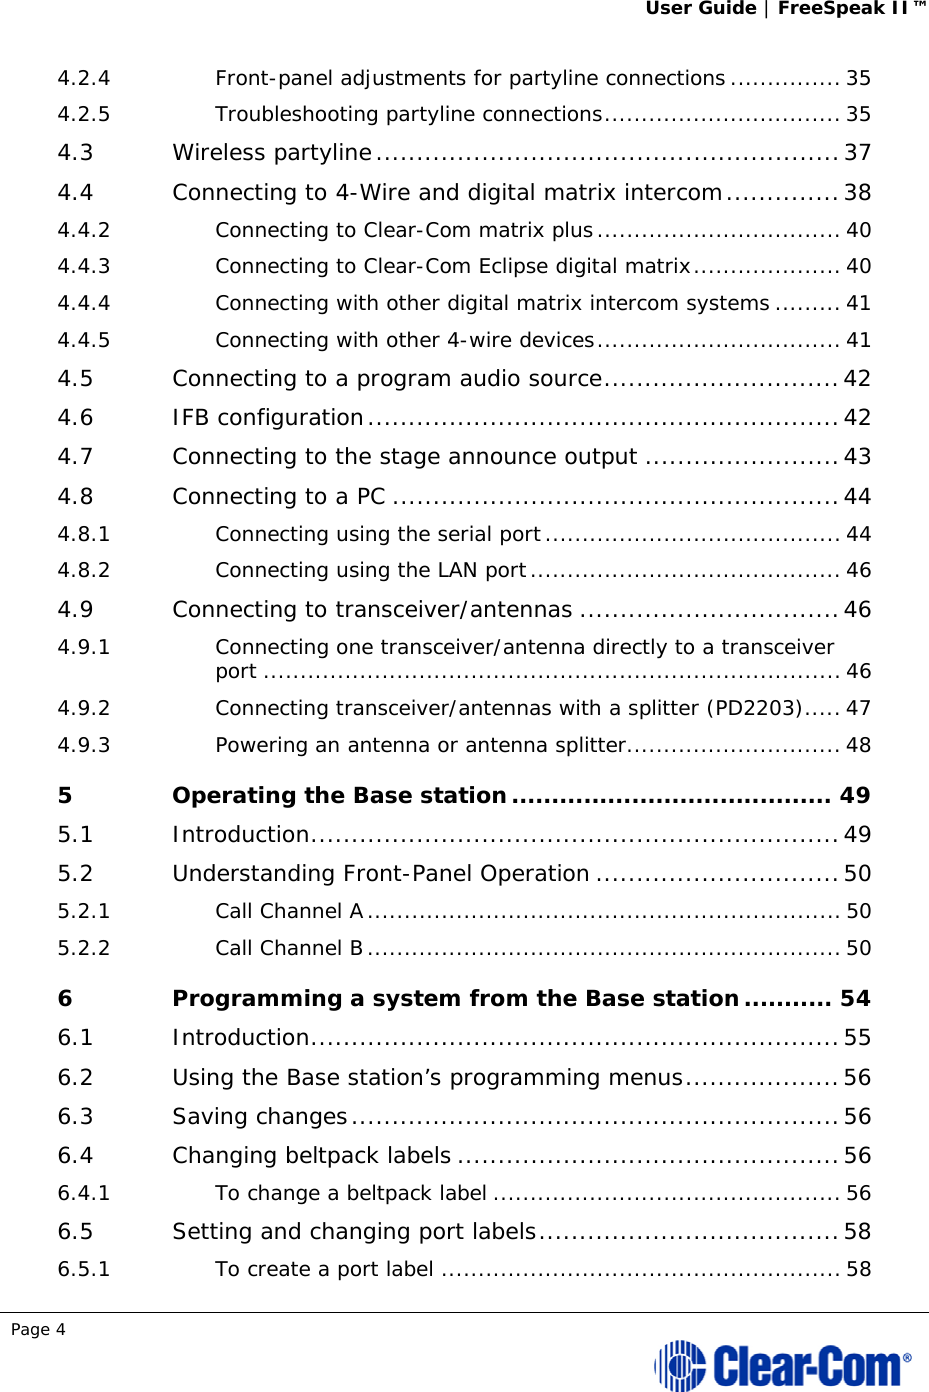 User Guide | FreeSpeak II™  Page 4  4.2.4Front-panel adjustments for partyline connections ............... 354.2.5Troubleshooting partyline connections ................................ 354.3Wireless partyline ......................................................... 374.4Connecting to 4-Wire and digital matrix intercom .............. 384.4.2Connecting to Clear-Com matrix plus ................................. 404.4.3Connecting to Clear-Com Eclipse digital matrix .................... 404.4.4Connecting with other digital matrix intercom systems ......... 414.4.5Connecting with other 4-wire devices ................................. 414.5Connecting to a program audio source ............................. 424.6IFB configuration .......................................................... 424.7Connecting to the stage announce output ........................ 434.8Connecting to a PC ....................................................... 444.8.1Connecting using the serial port ........................................ 444.8.2Connecting using the LAN port .......................................... 464.9Connecting to transceiver/antennas ................................ 464.9.1Connecting one transceiver/antenna directly to a transceiver port .............................................................................. 464.9.2Connecting transceiver/antennas with a splitter (PD2203) ..... 474.9.3Powering an antenna or antenna splitter ............................. 485Operating the Base station ........................................ 495.1Introduction ................................................................. 495.2Understanding Front-Panel Operation .............................. 505.2.1Call Channel A ................................................................ 505.2.2Call Channel B ................................................................ 506Programming a system from the Base station ........... 546.1Introduction ................................................................. 556.2Using the Base station’s programming menus ................... 566.3Saving changes ............................................................ 566.4Changing beltpack labels ............................................... 566.4.1To change a beltpack label ............................................... 566.5Setting and changing port labels ..................................... 586.5.1To create a port label ...................................................... 58